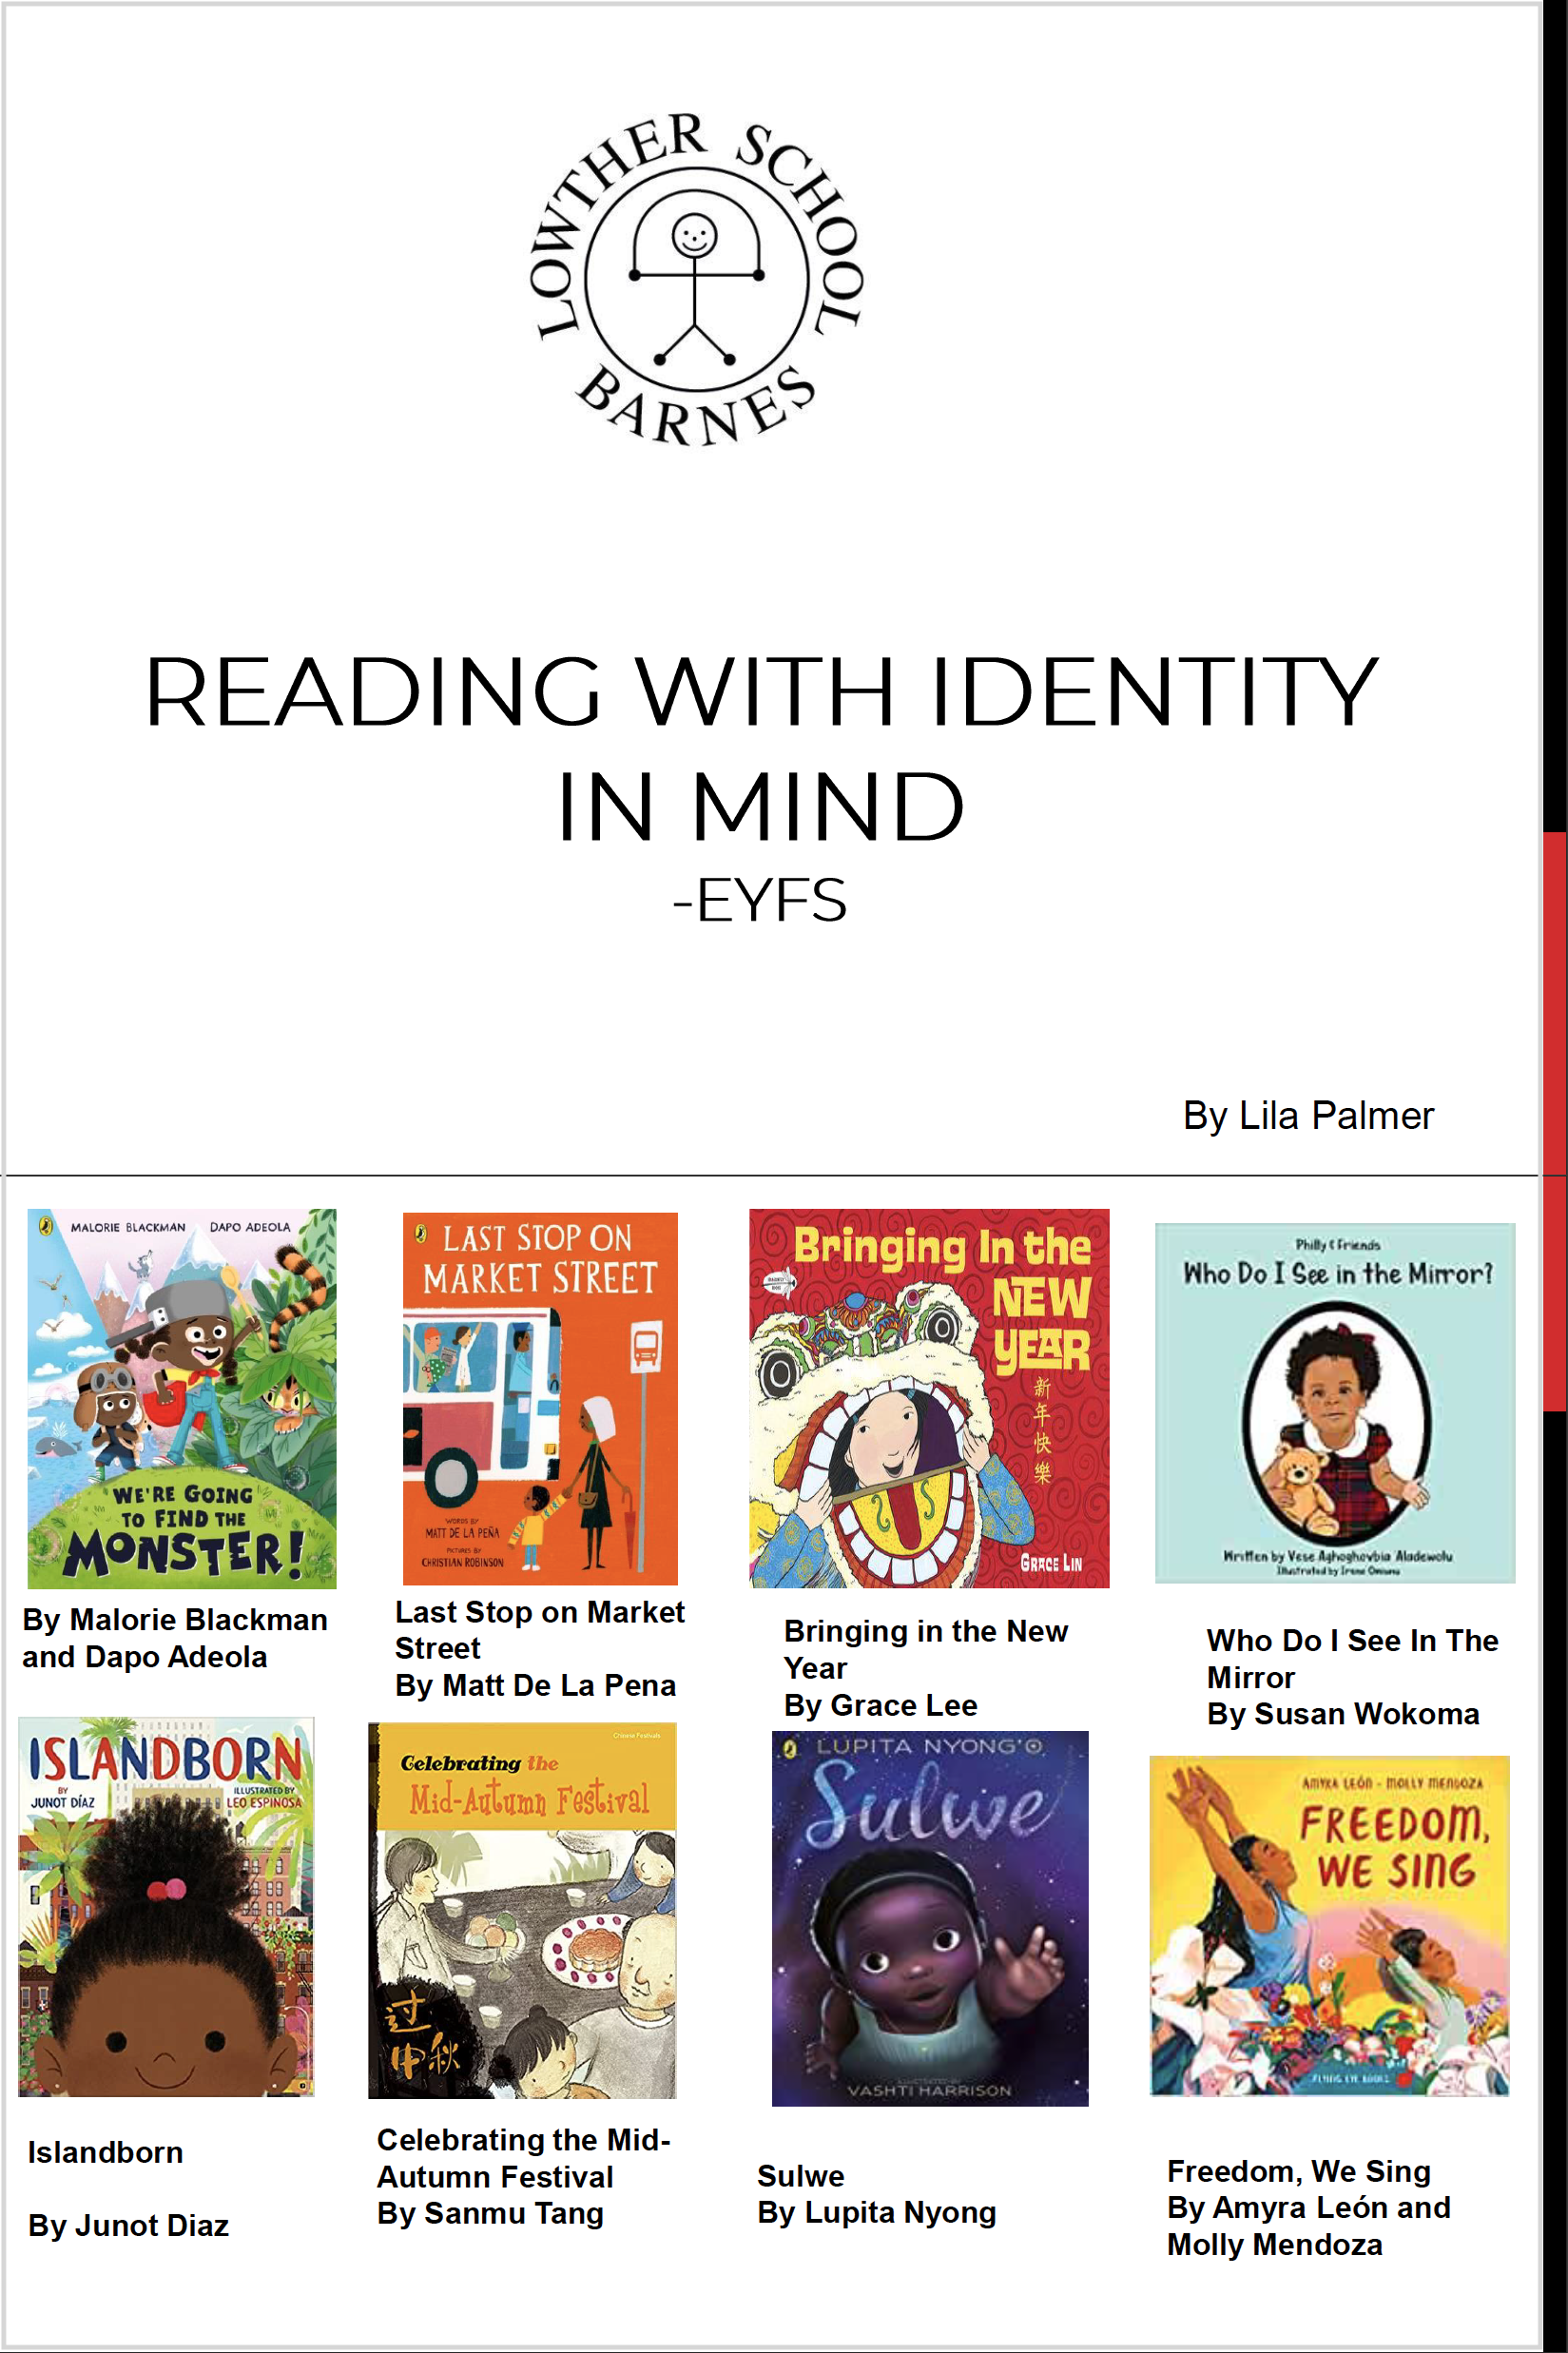 EYFS Reading with identity in mind PDF link